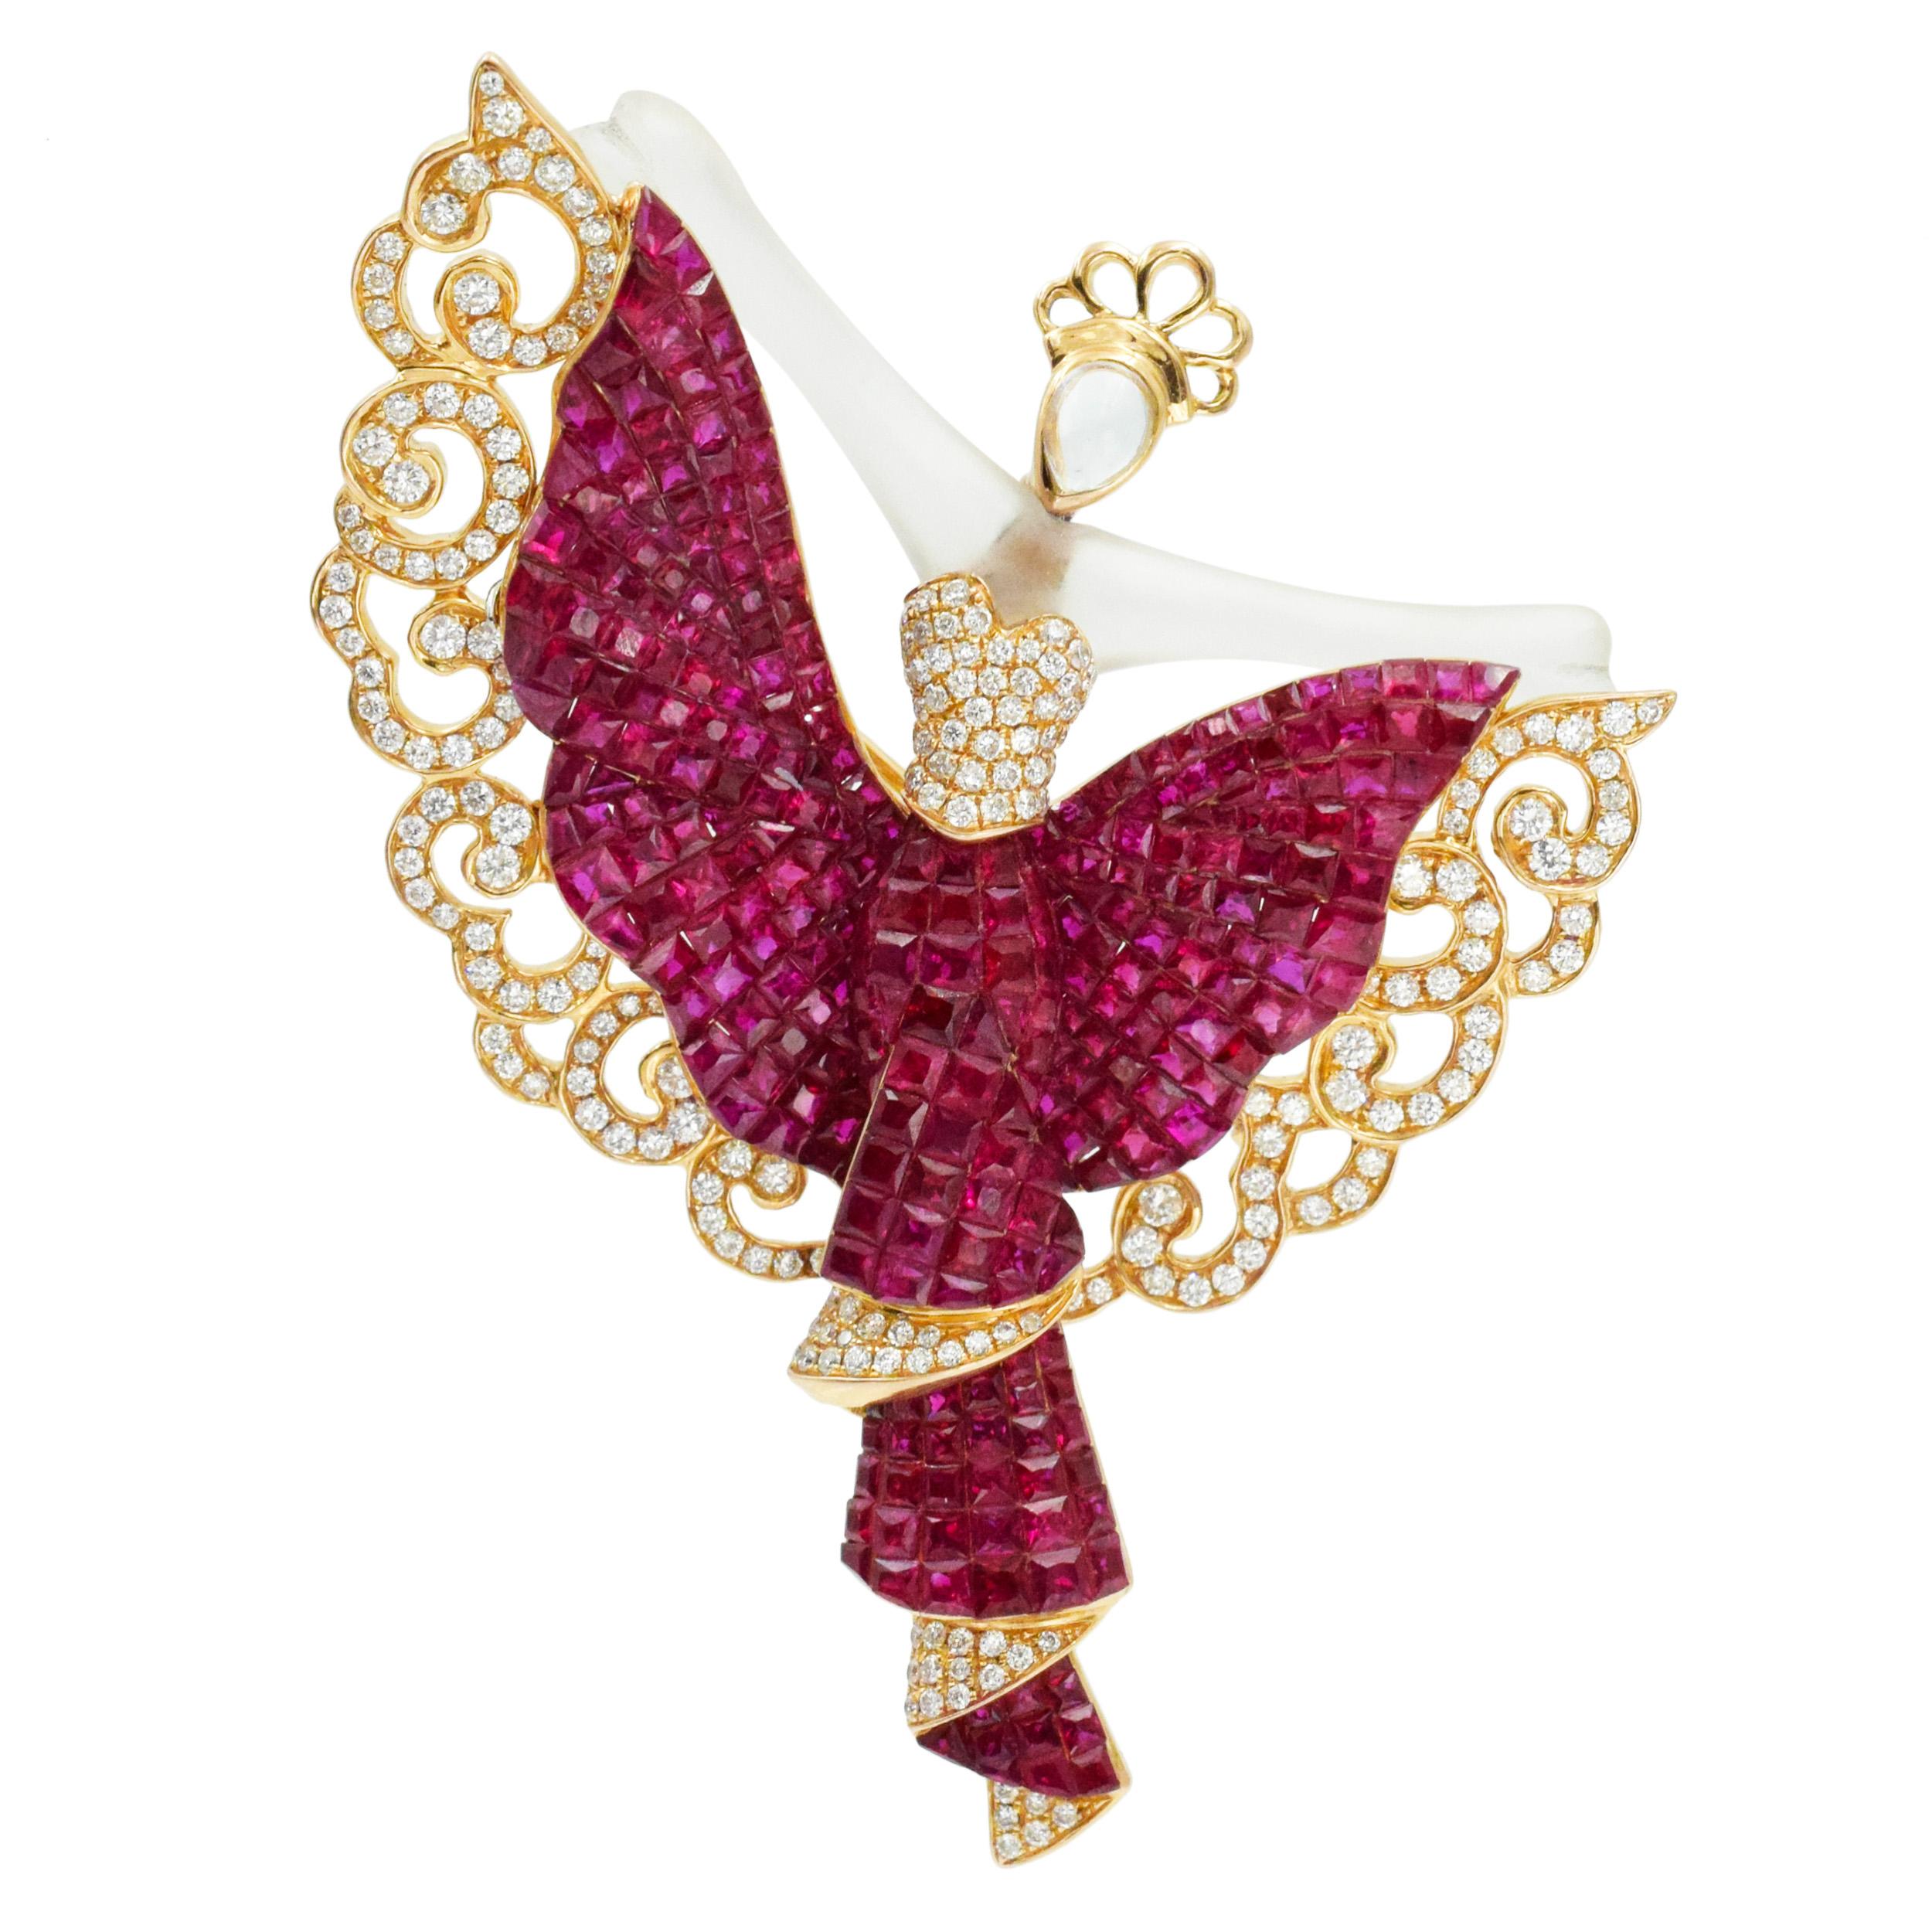 MYSTERY set ruby, diamond and crystal brooch in 18k yellow gold. Equipped with double pin and thrombone lock. The dress of the dancer is set with total of approximately 18.00 ct of mystery set rubies and 258 of round brilliant cut diamonds with